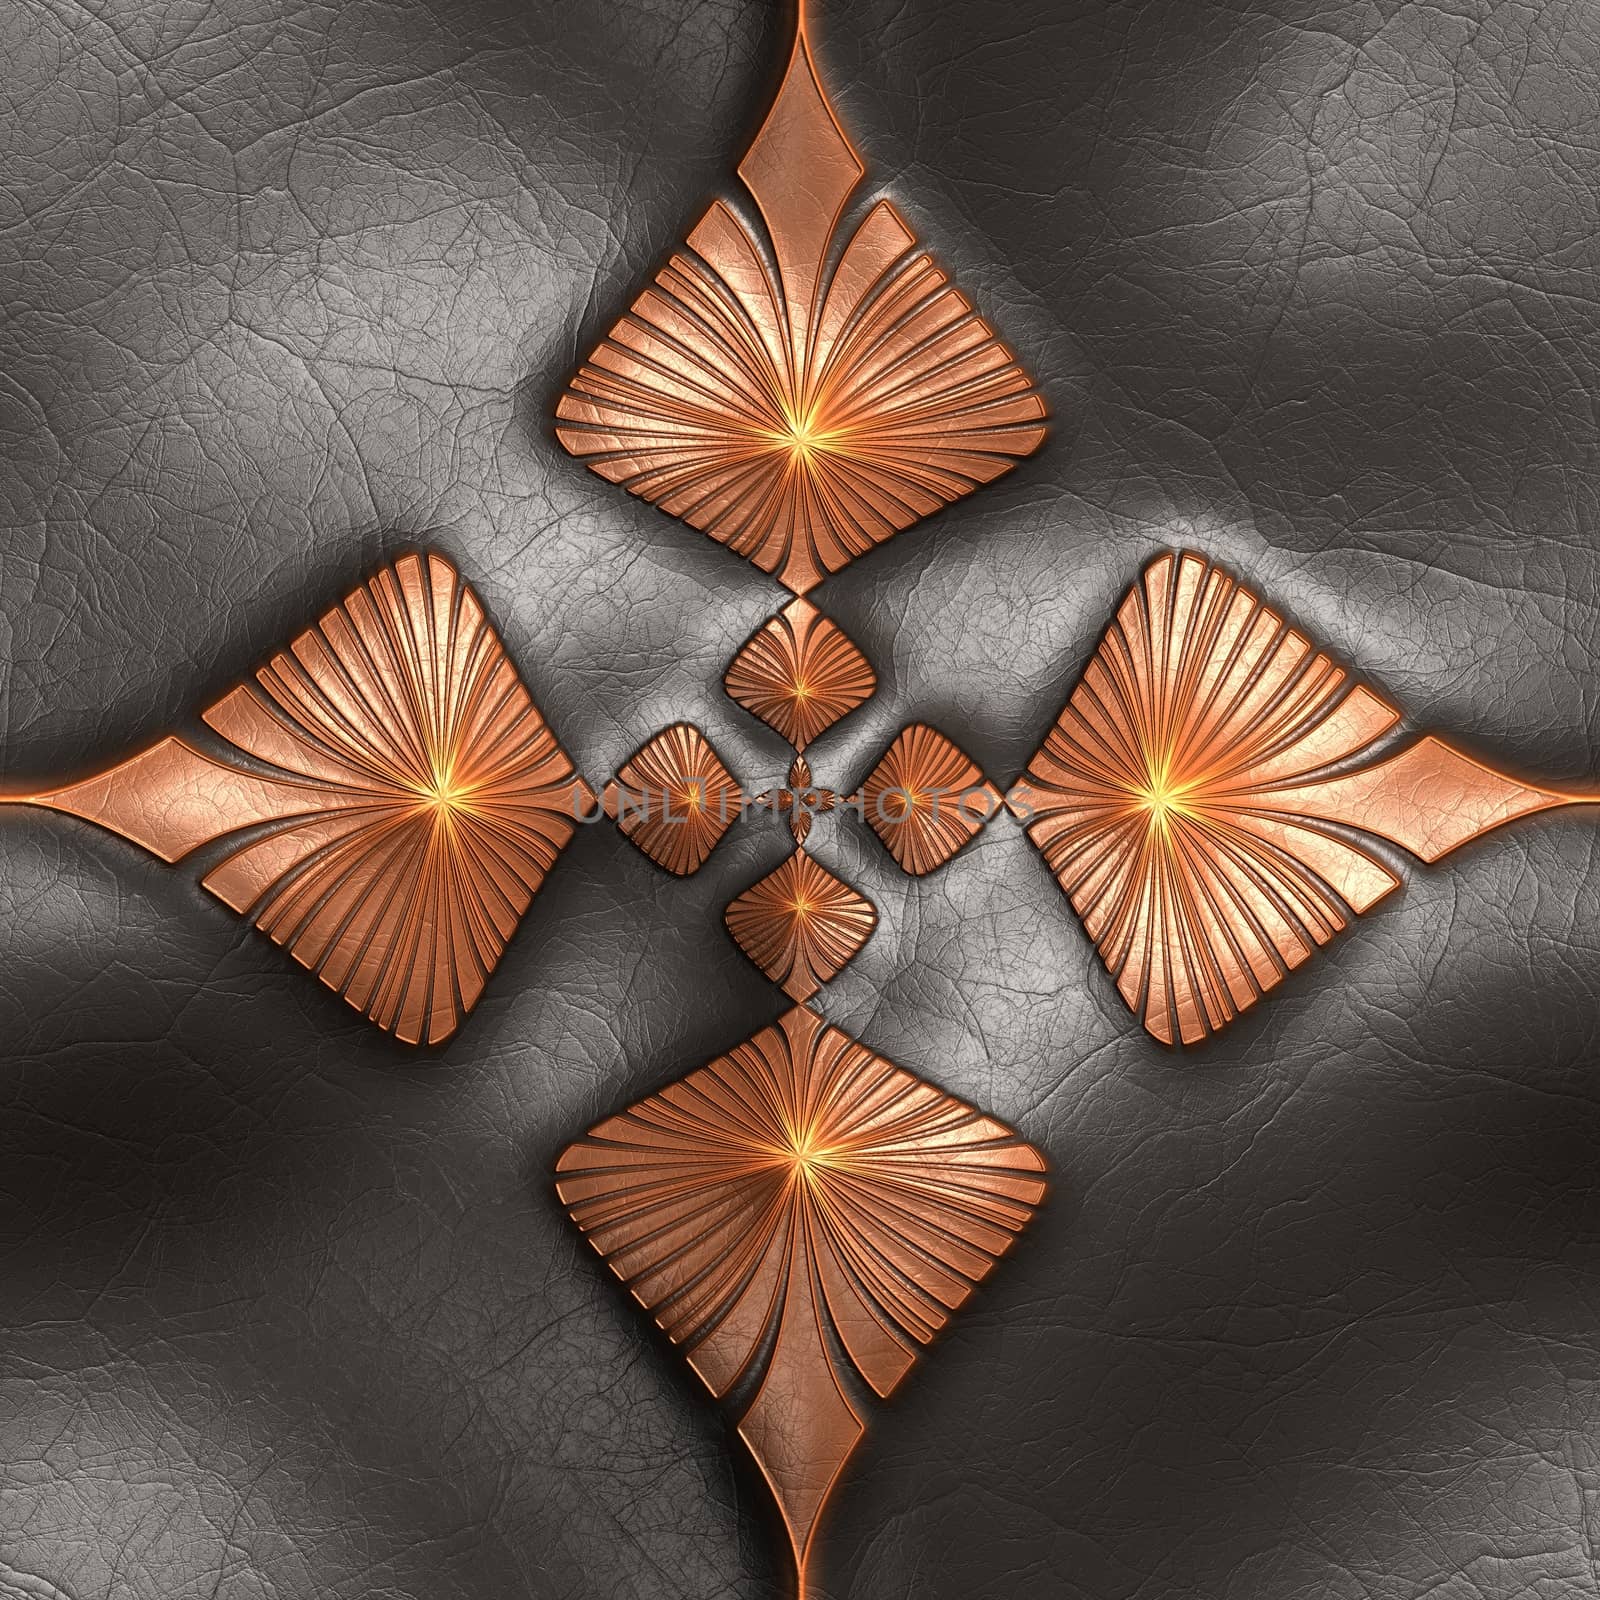 Luxury background tile with embossed pattern on leather